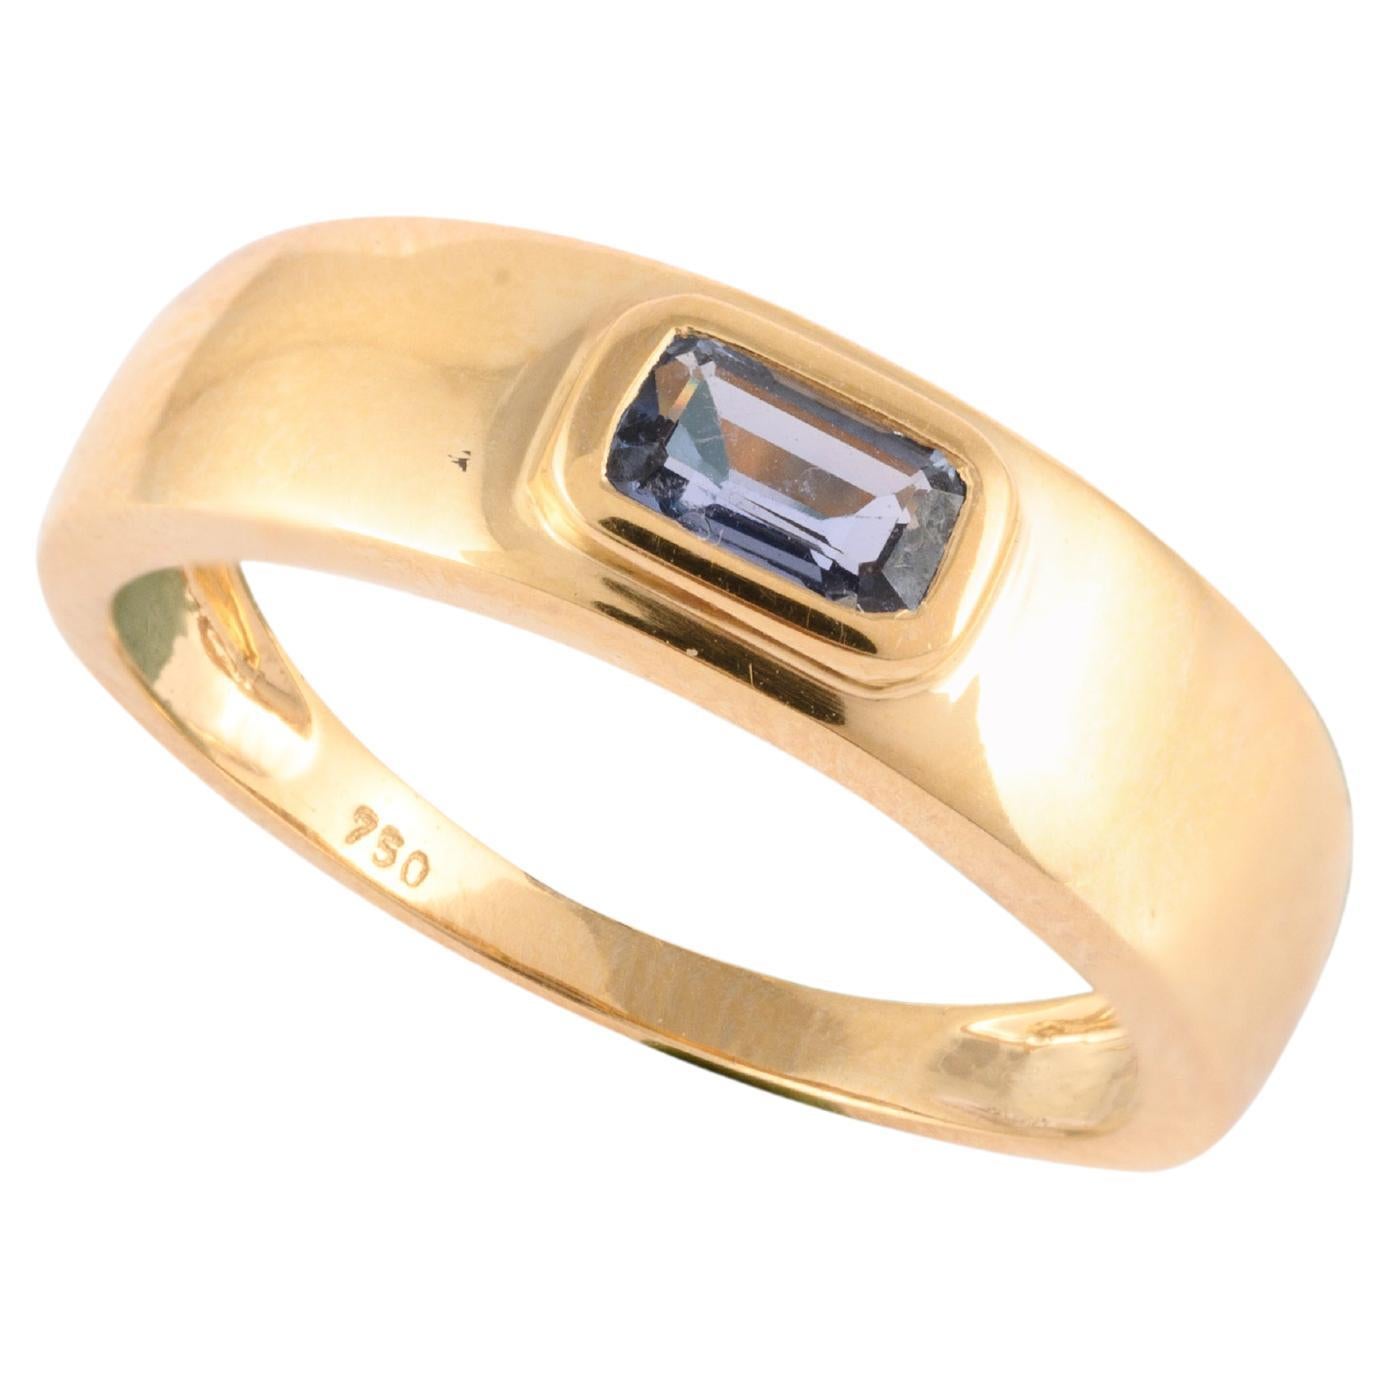 For Sale:  Genuine Tanzanite Ring Gift for Father in 18k Solid Yellow Gold